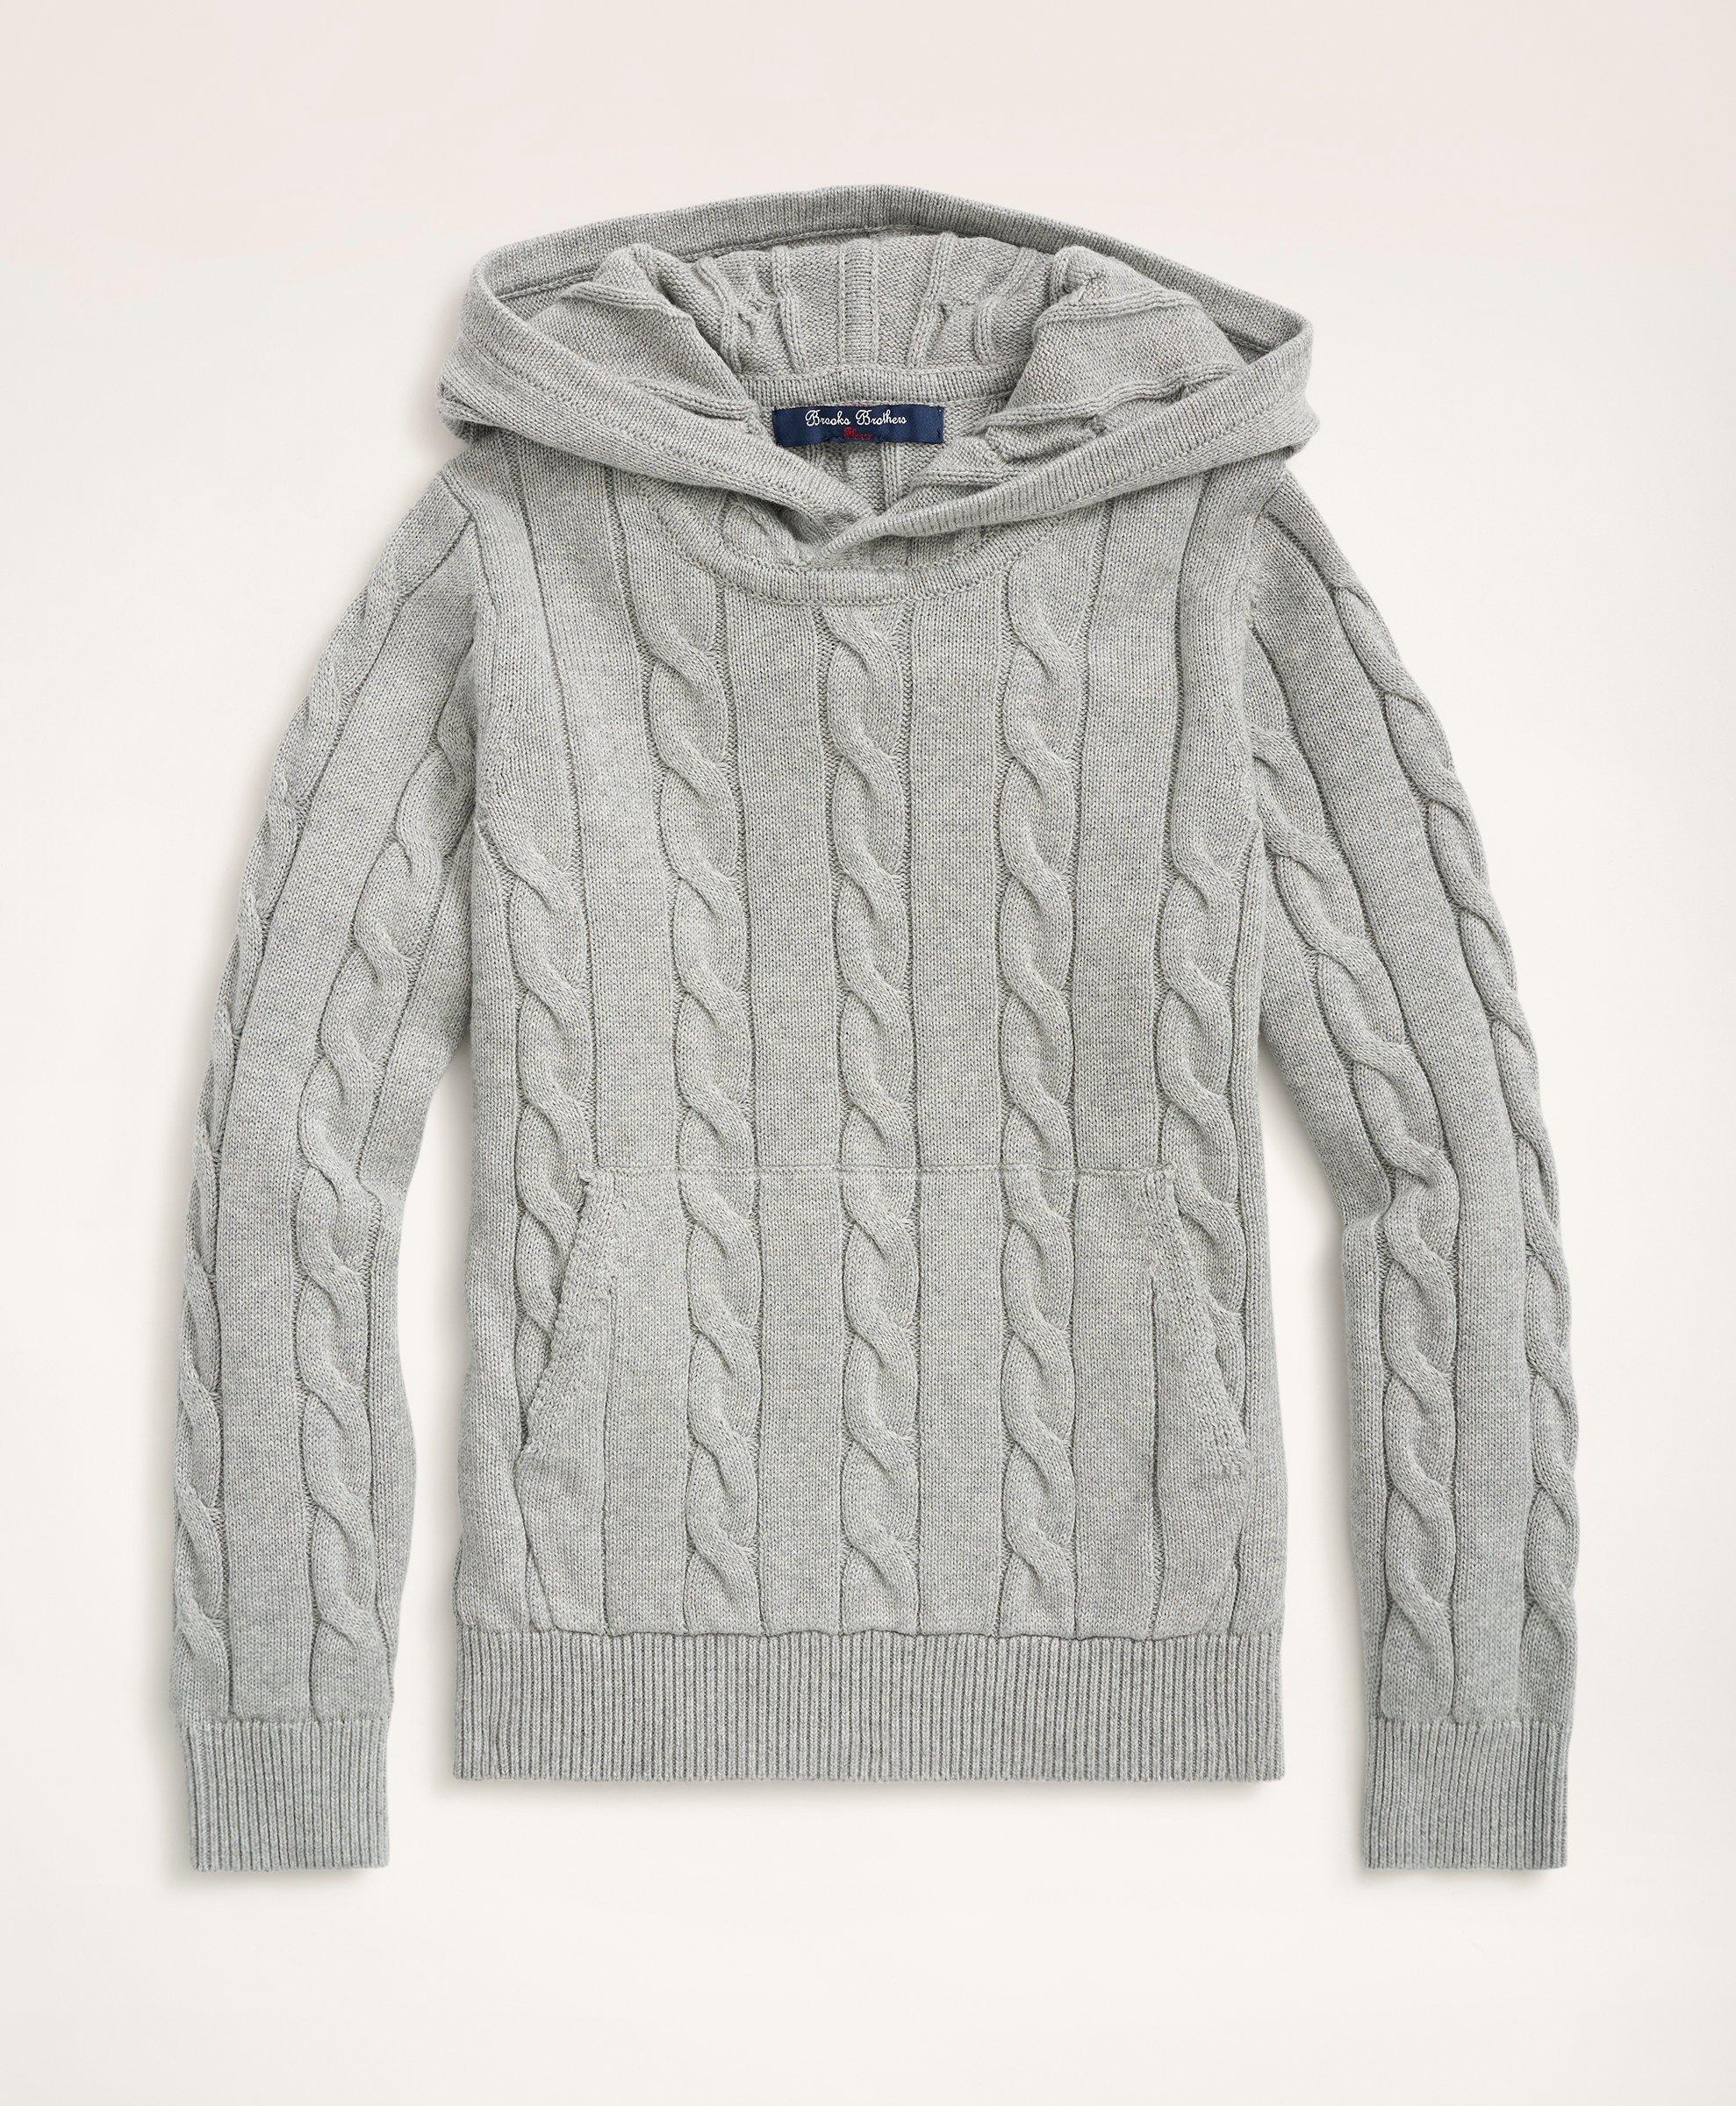 Brooks Brothers Kids'  Boys Cotton Cable-knit Hoodie Sweater | Light Grey Heather | Size Medium